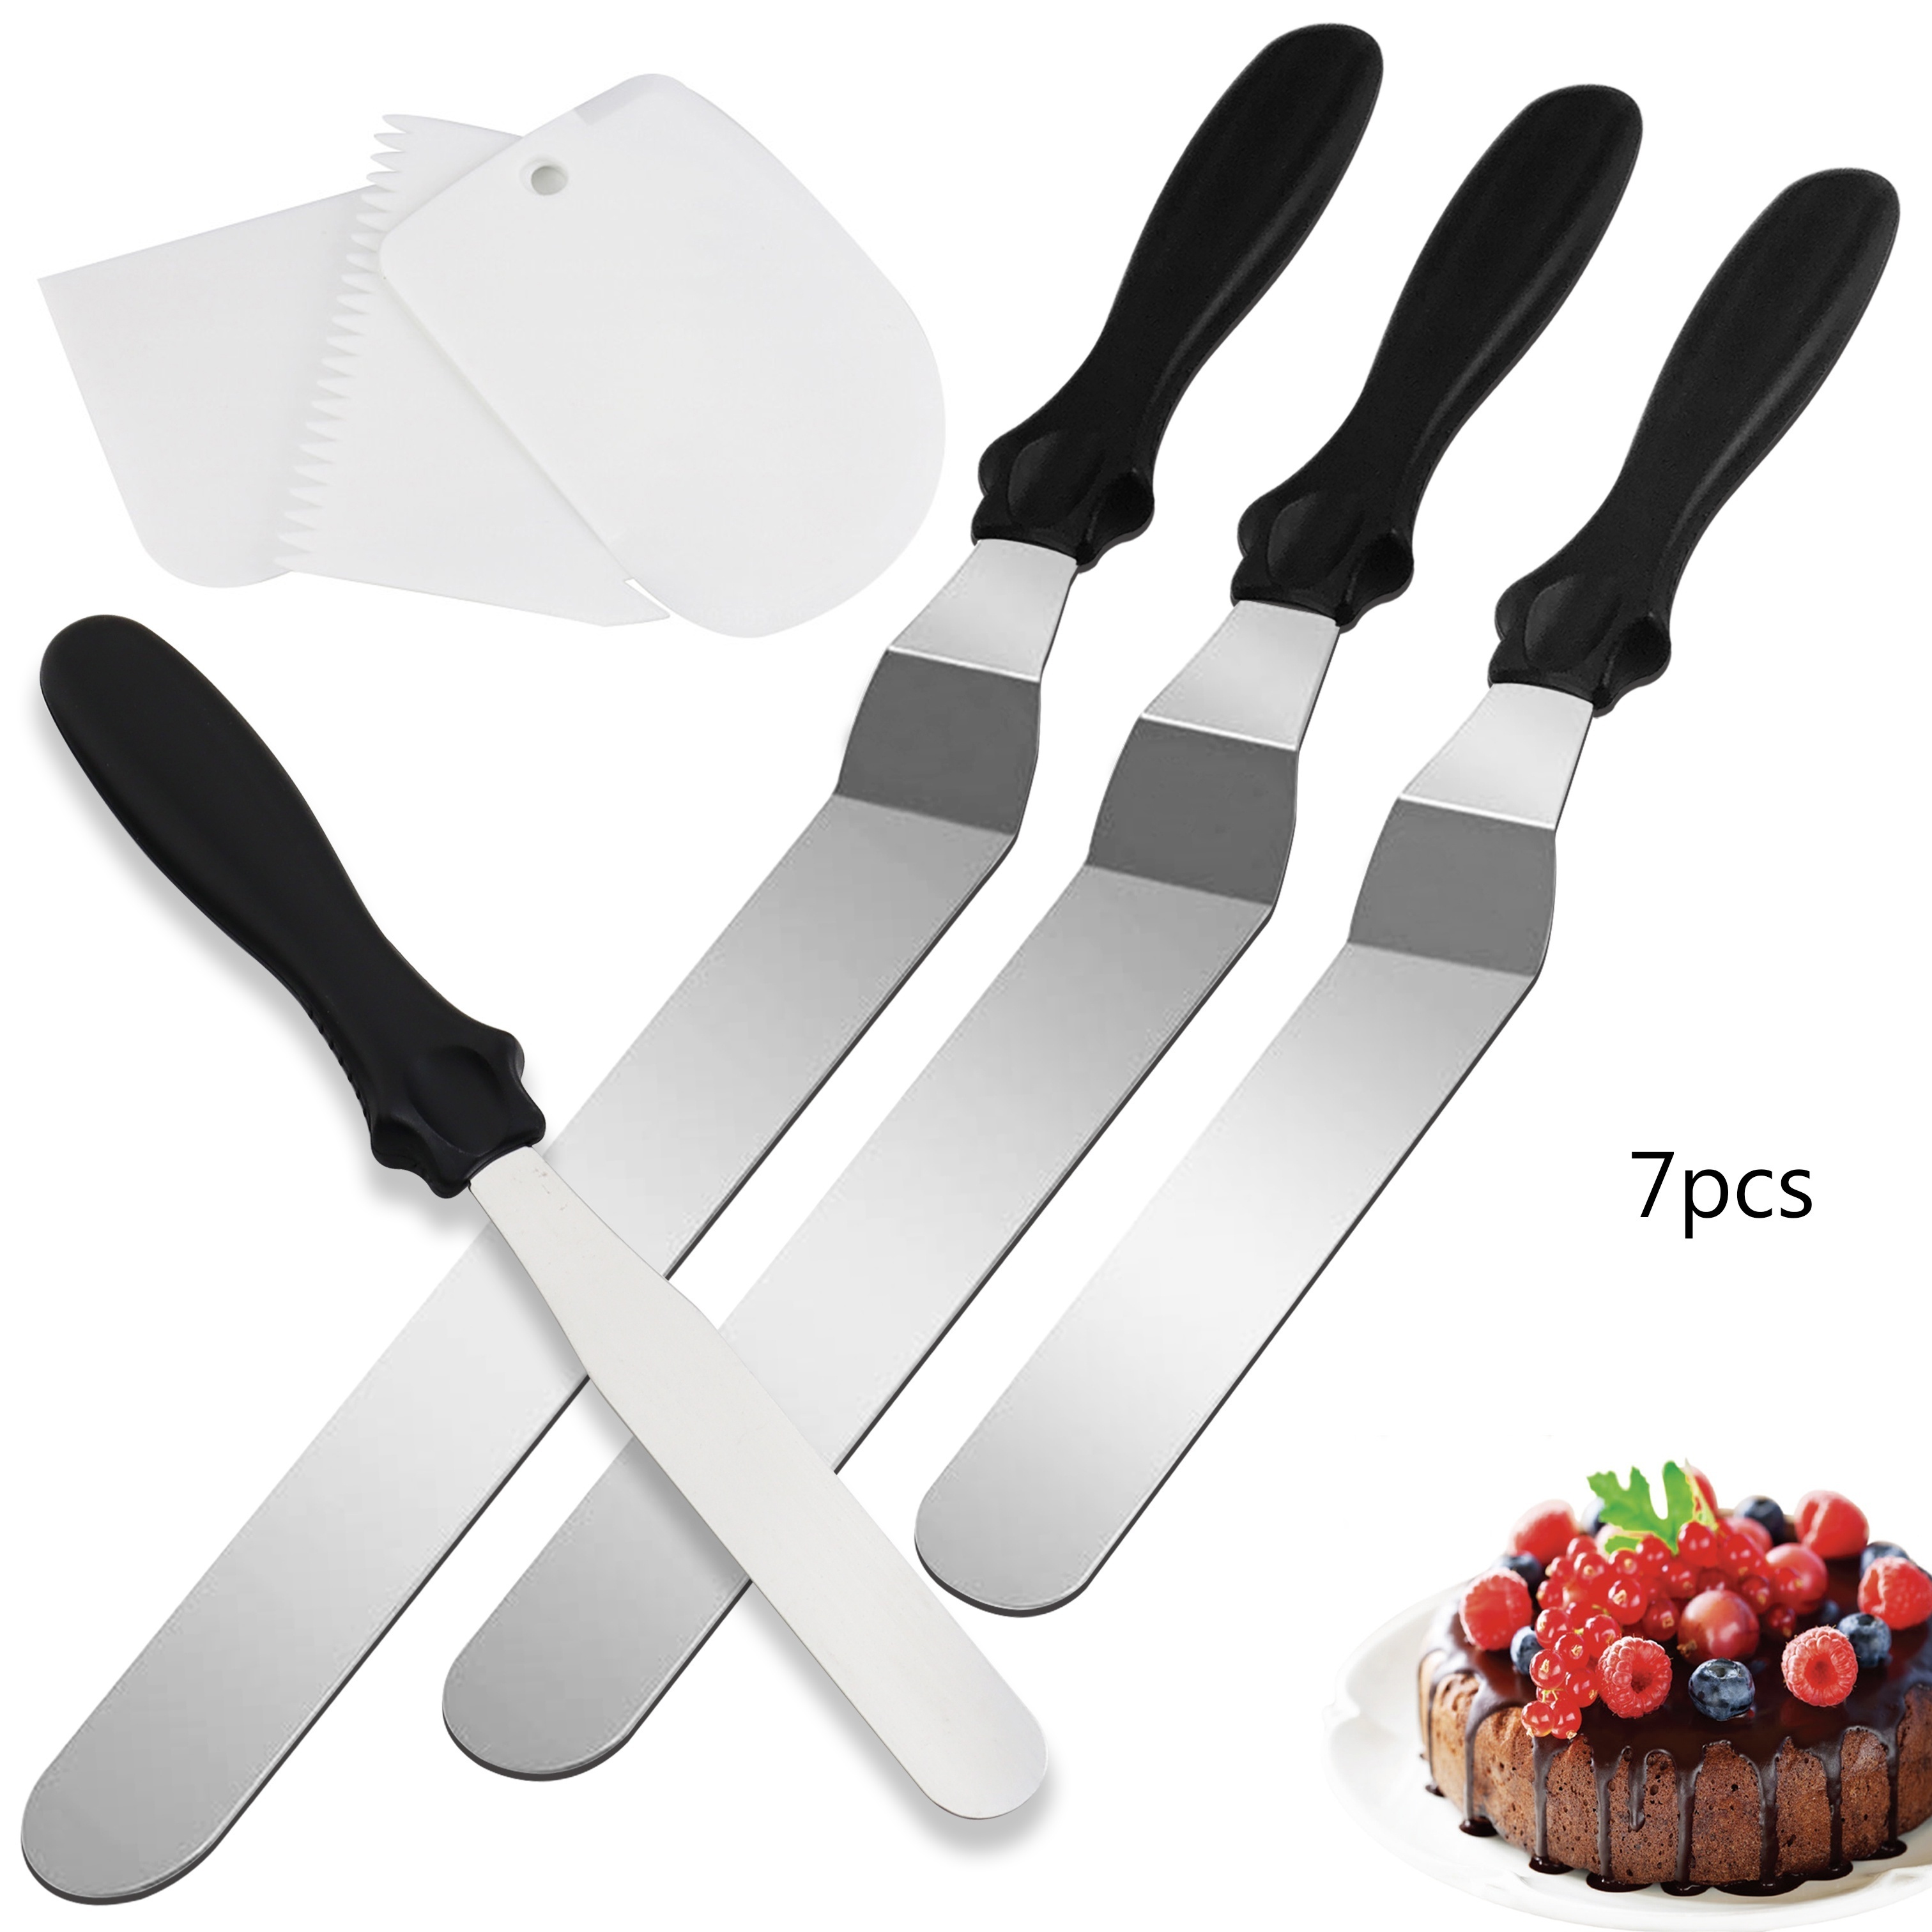 Offset Spatula 6,8,10 Cake Icing Professional Stainless Steel Decorating  Tool